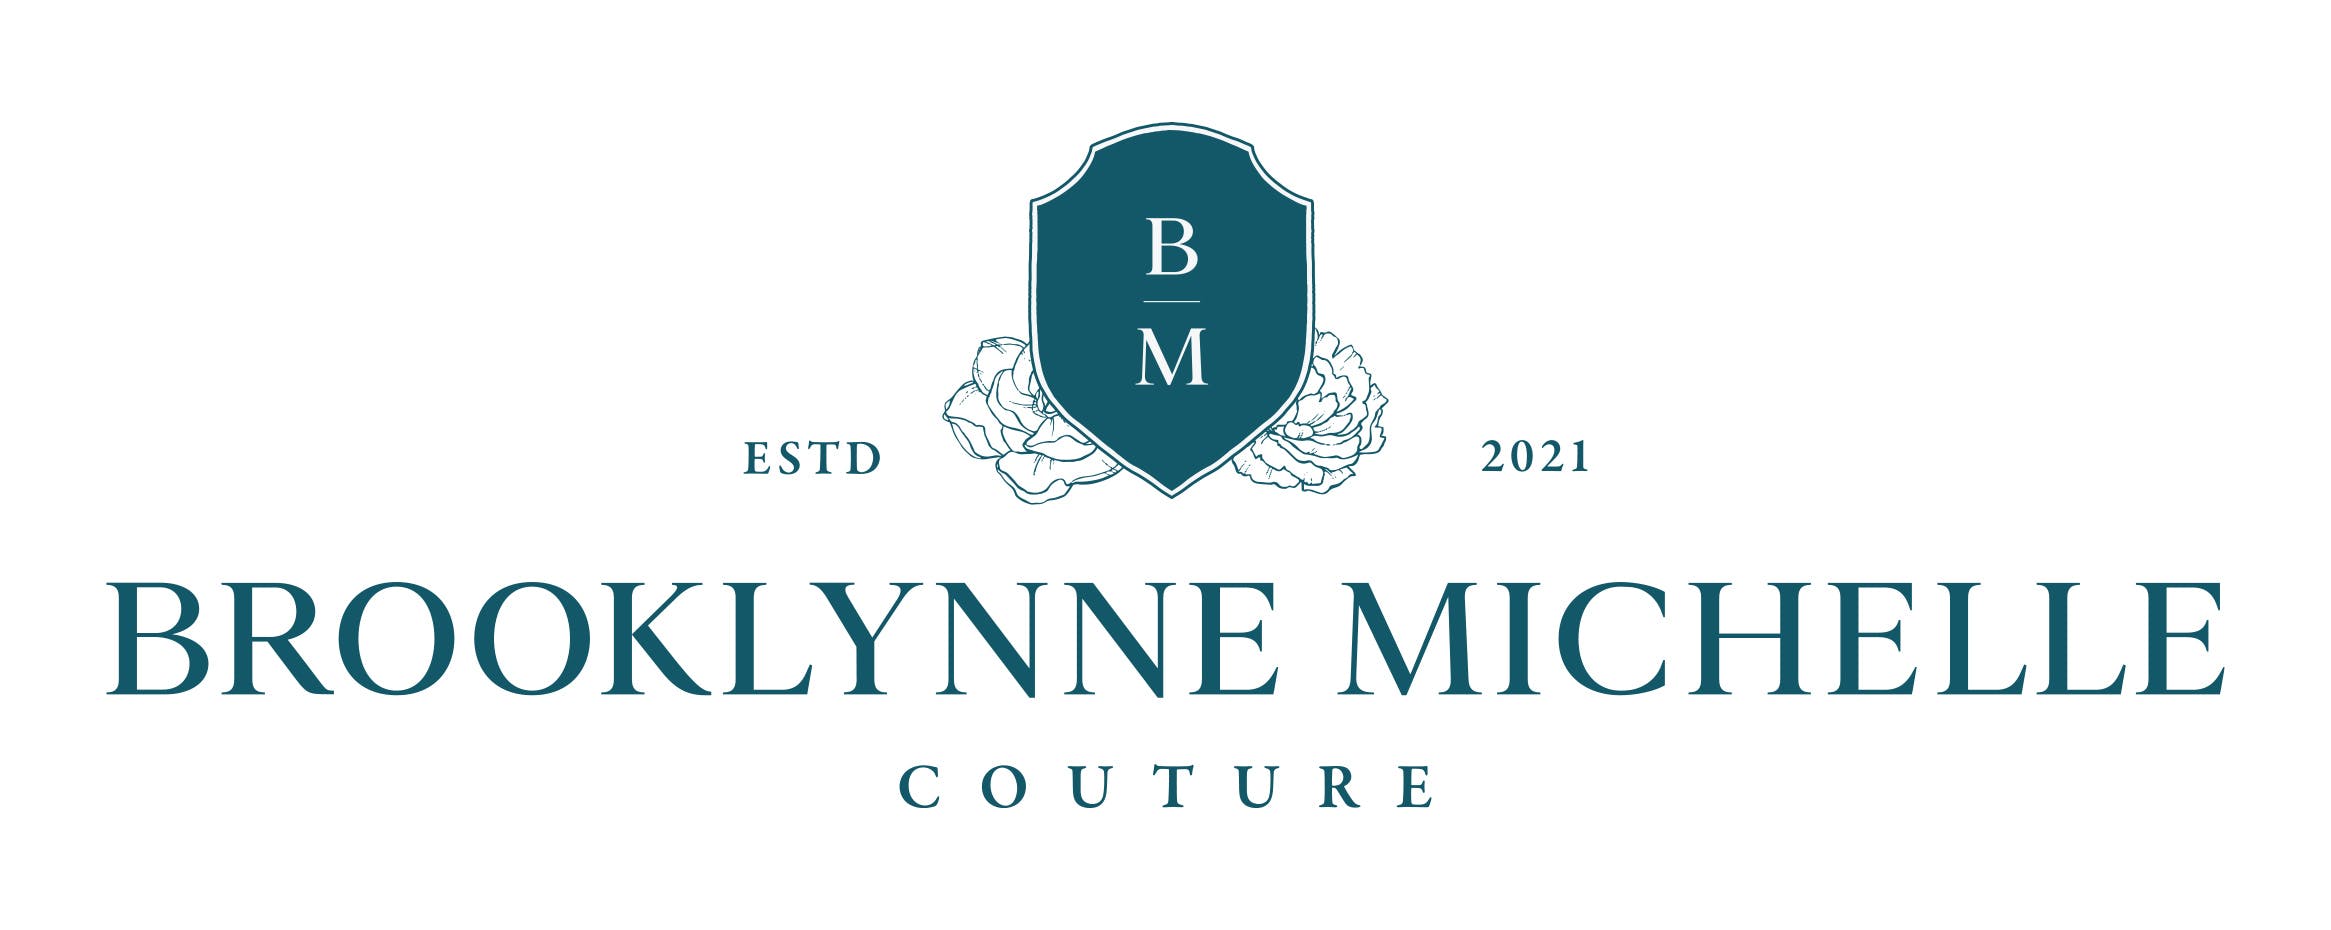 horizontal logo for brooklynne michelle couture in teal